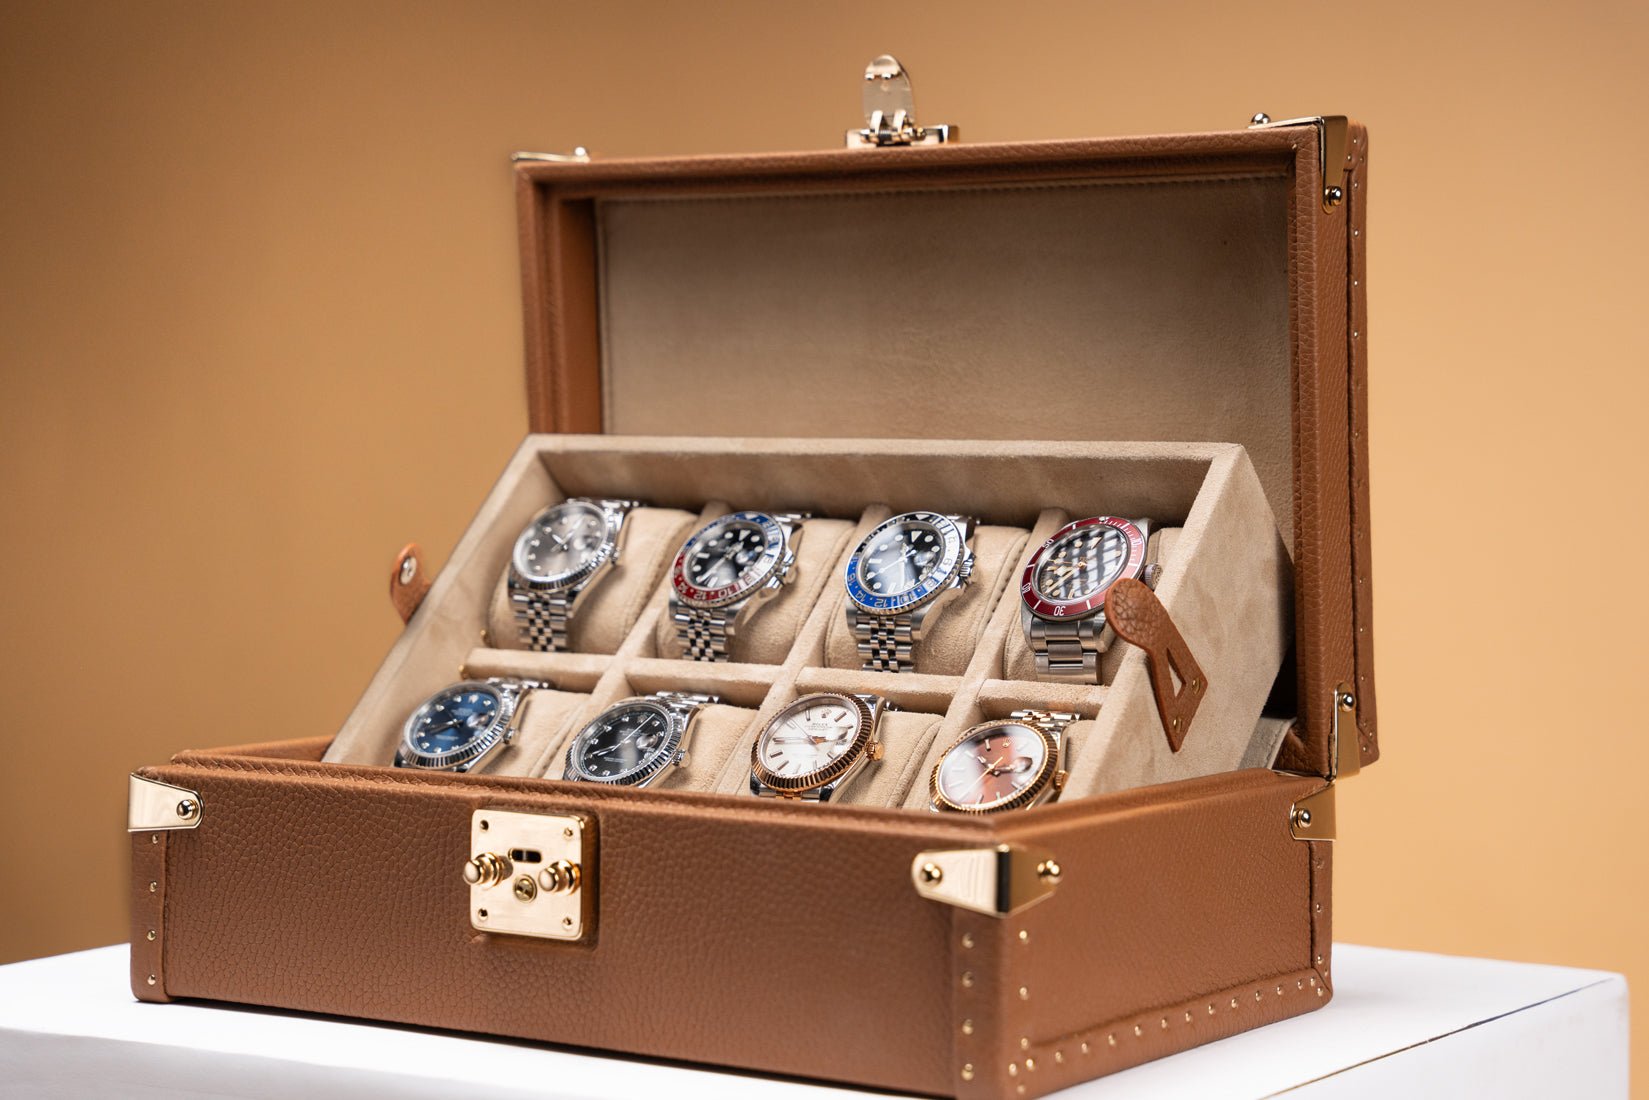 Bosphorus LeatherPetra Watch Case - Togo Camel For 8 Watches